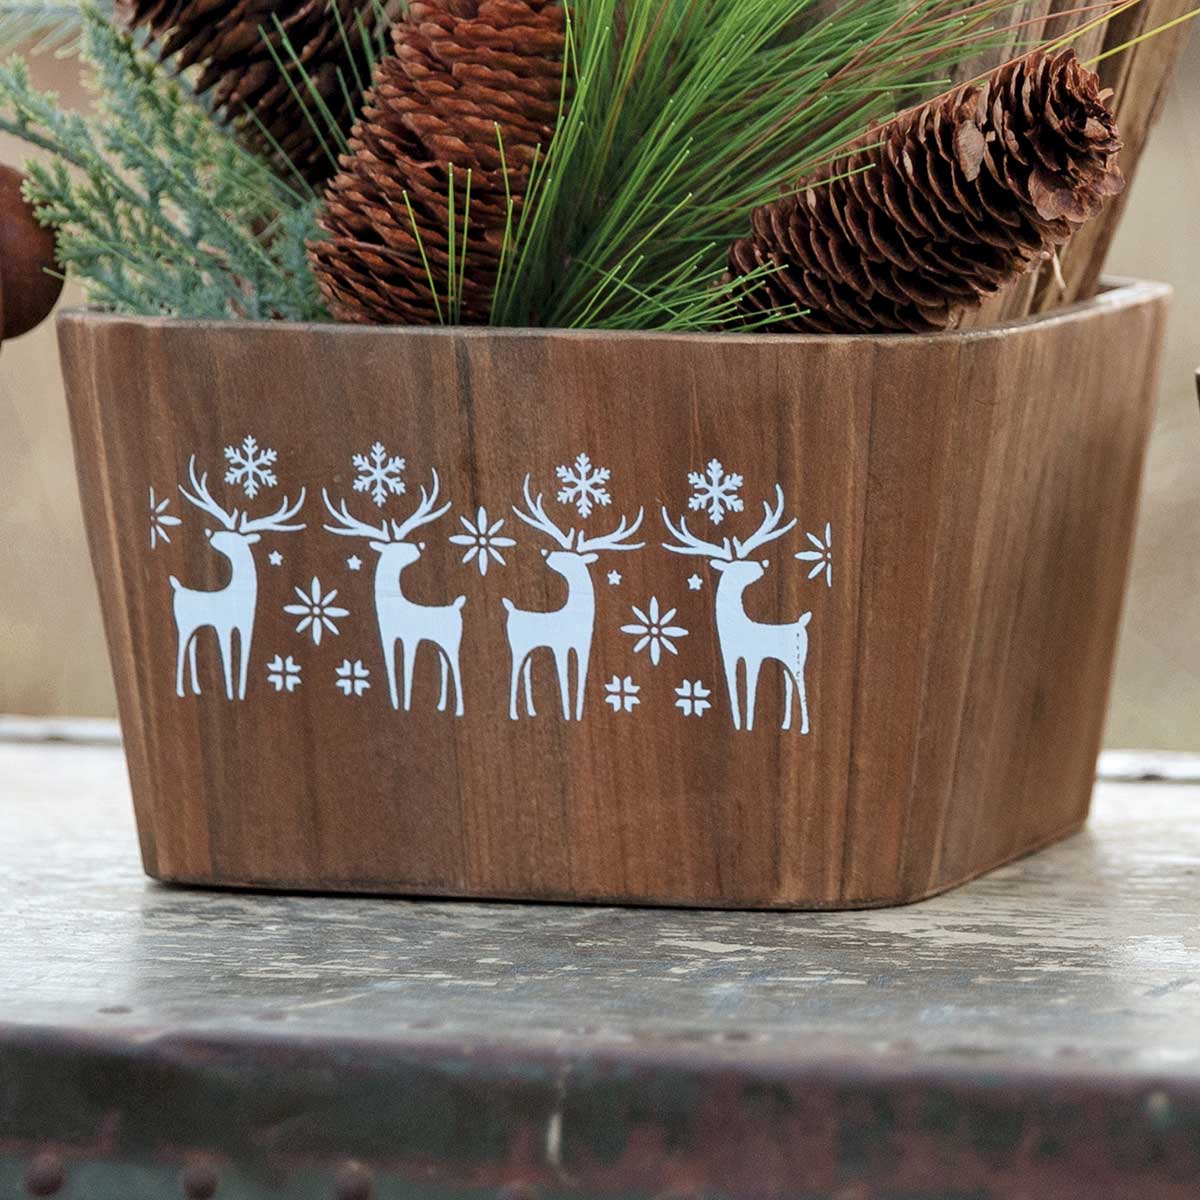 SQUARE WOOD BOX WITH DEER DESIGN LARGE 7.5"X4.25"